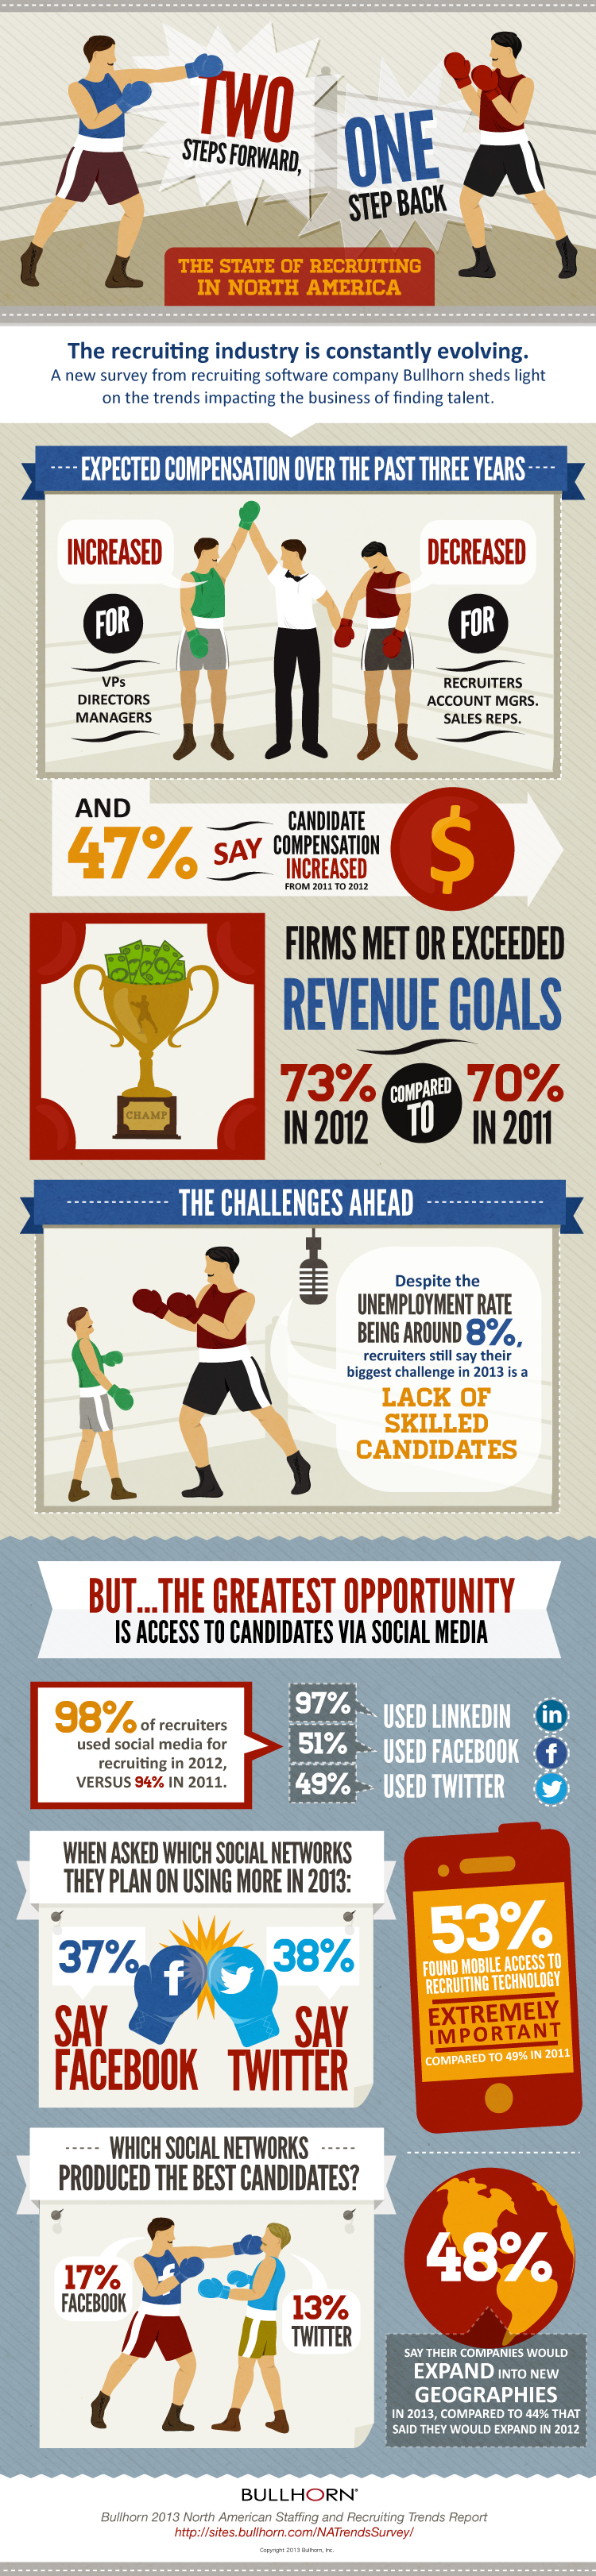 staffing and recruiting trends in 2013